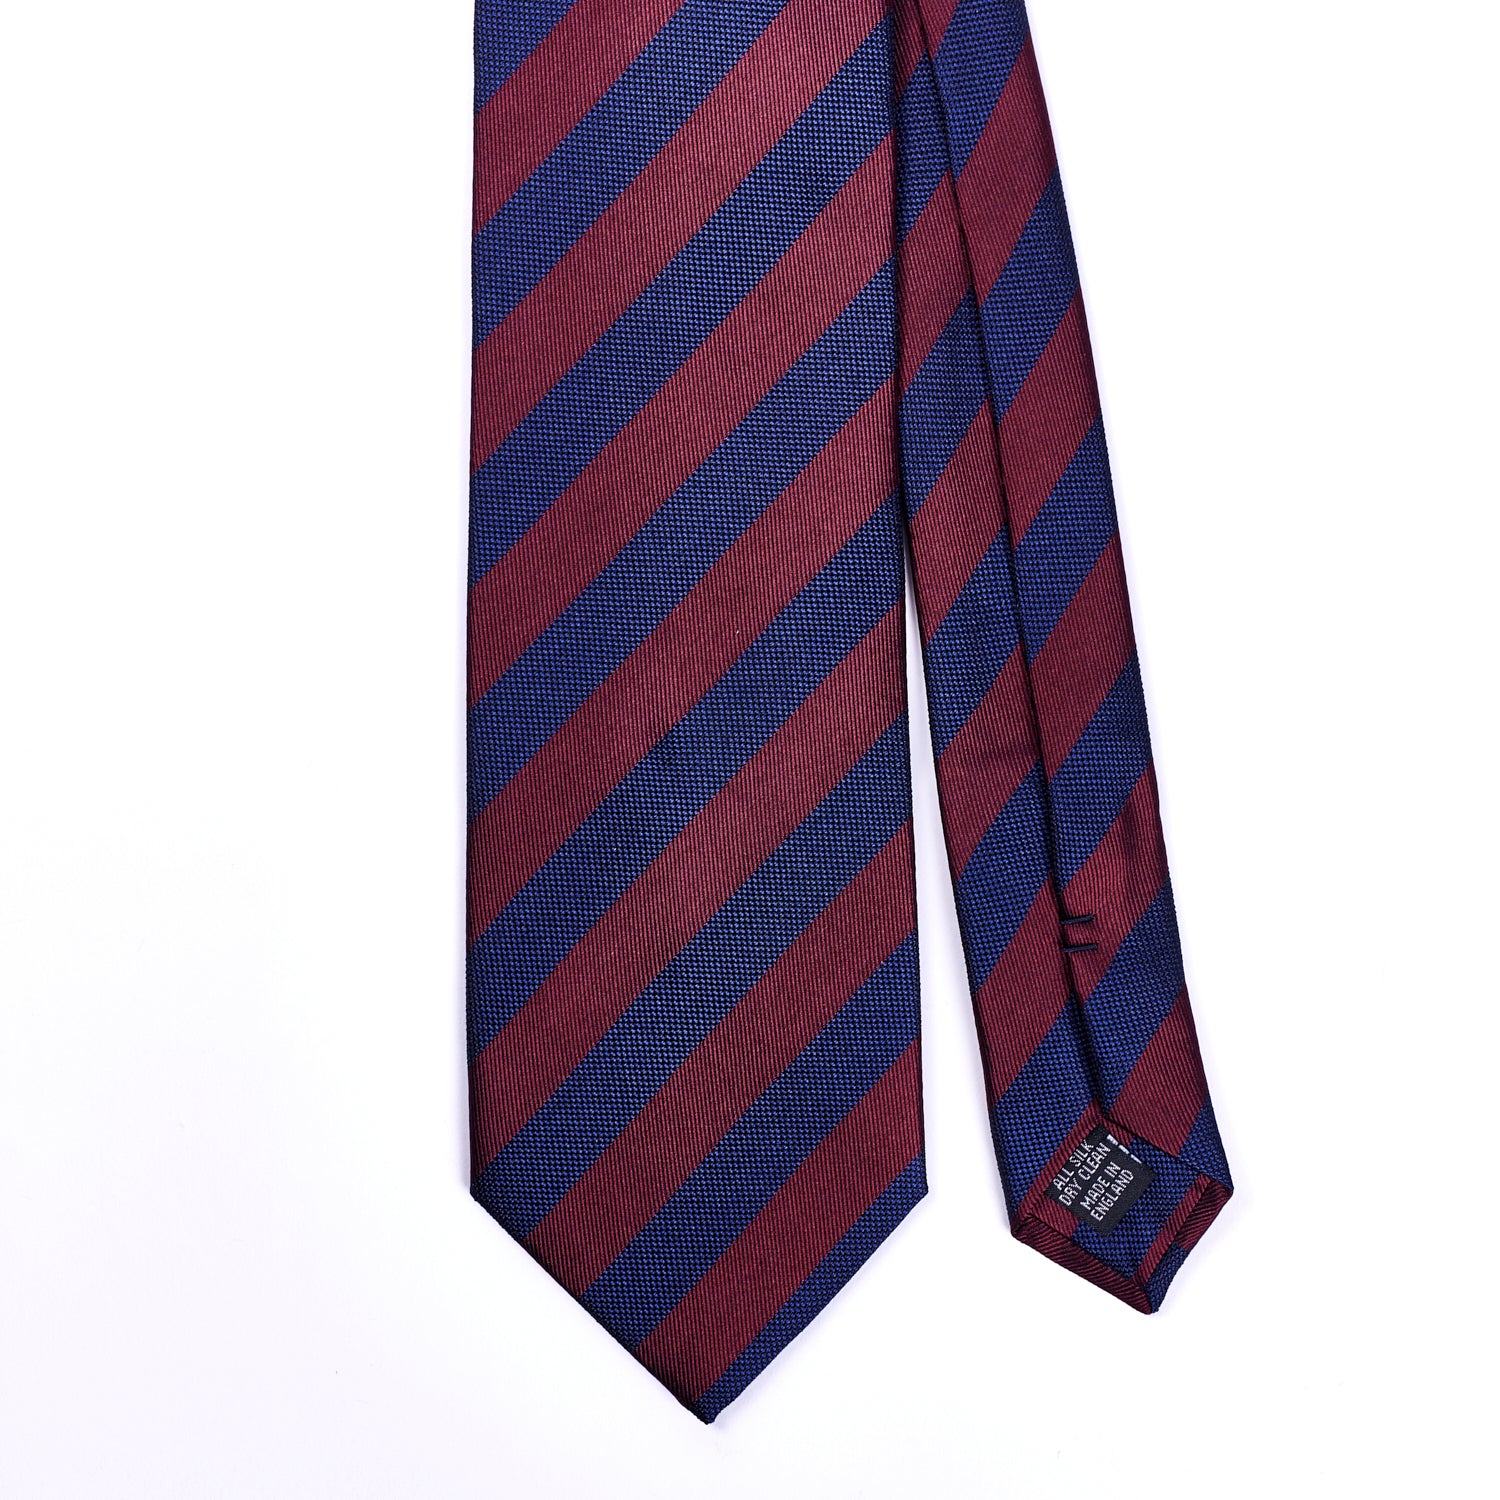 A Sovereign Grade Woven Navy and Burgundy Rep Tie, 150 cm handmade in the United Kingdom by KirbyAllison.com.